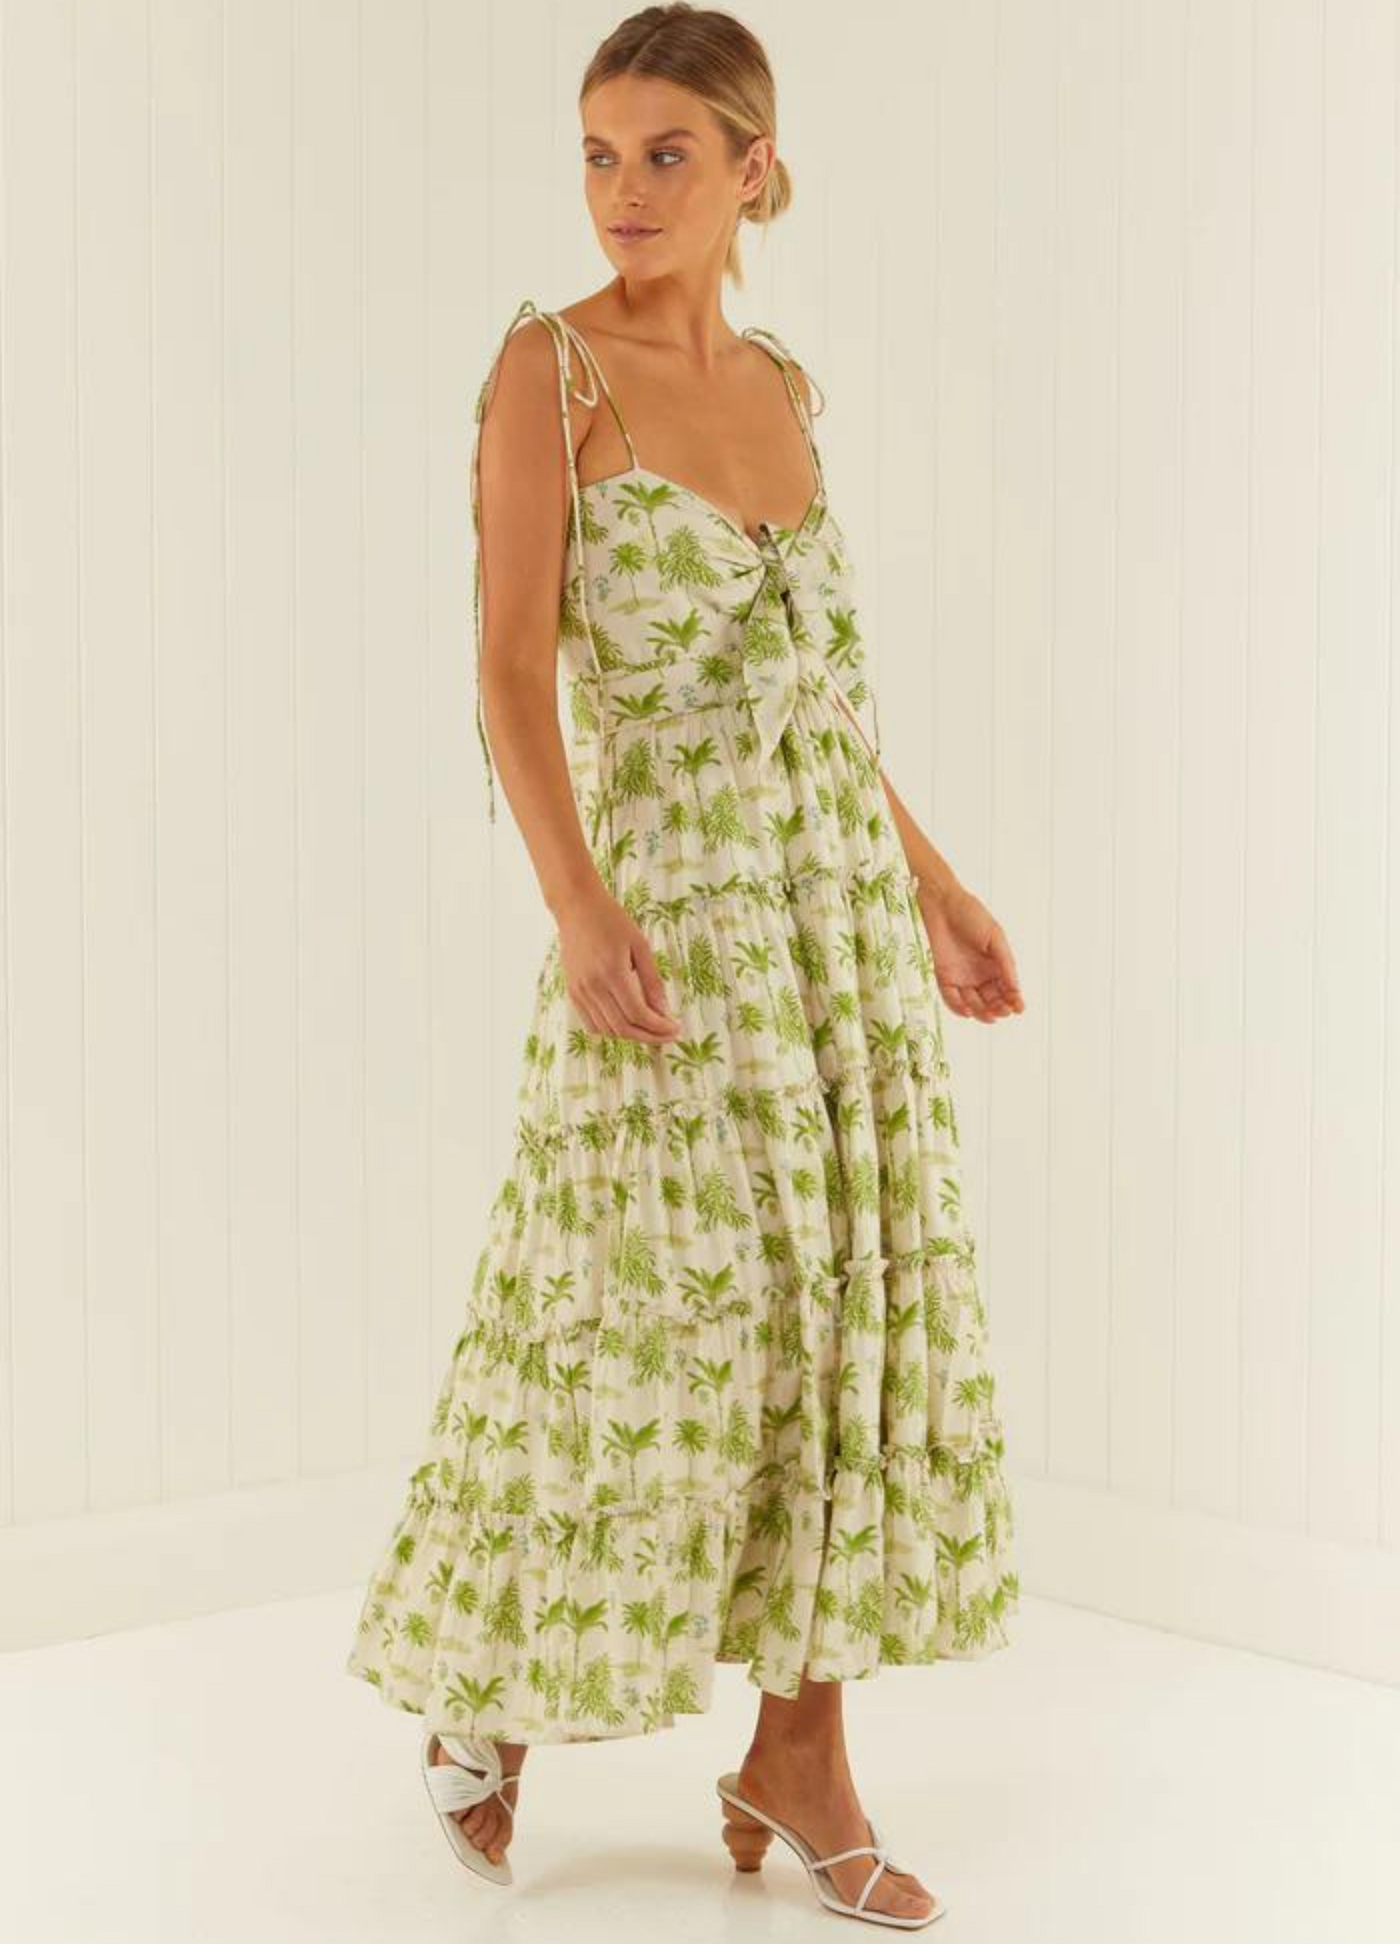 Model wearing the palm noosa james dress in green palm print